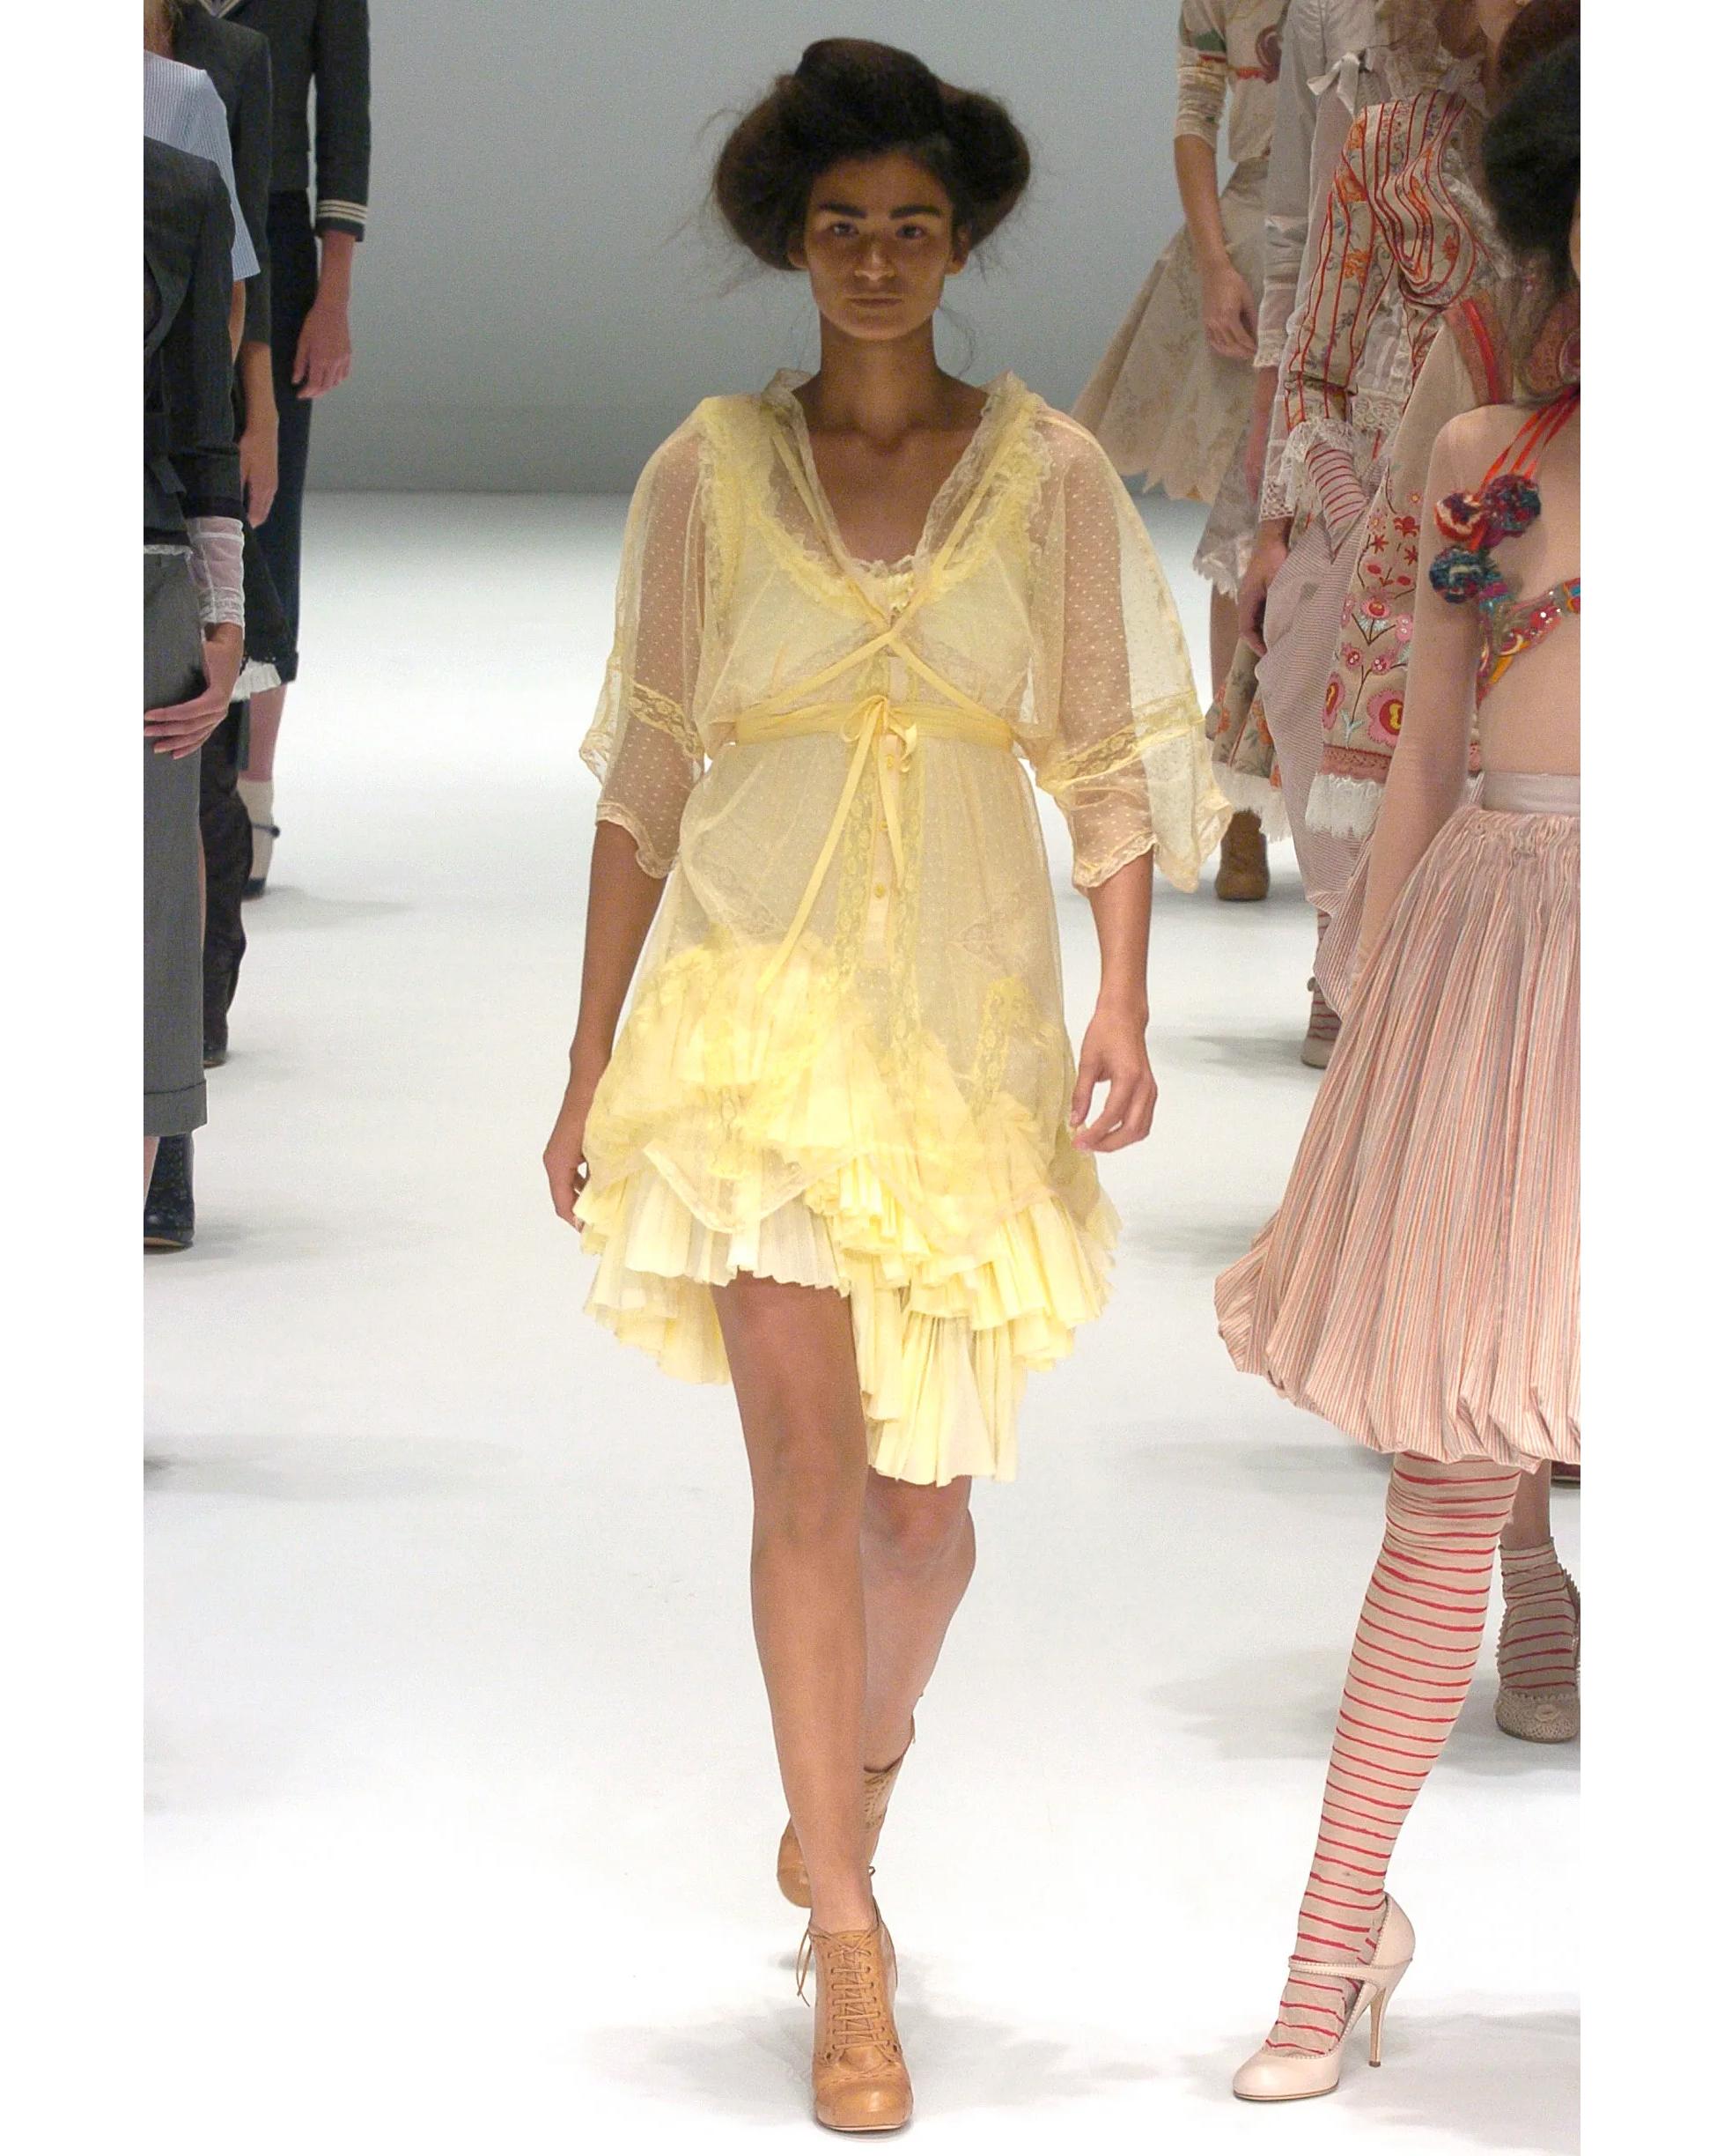 S/S 2005 Alexander McQueen (Lifetime) Pale Yellow Pleated and Lace Cotton Dress 2